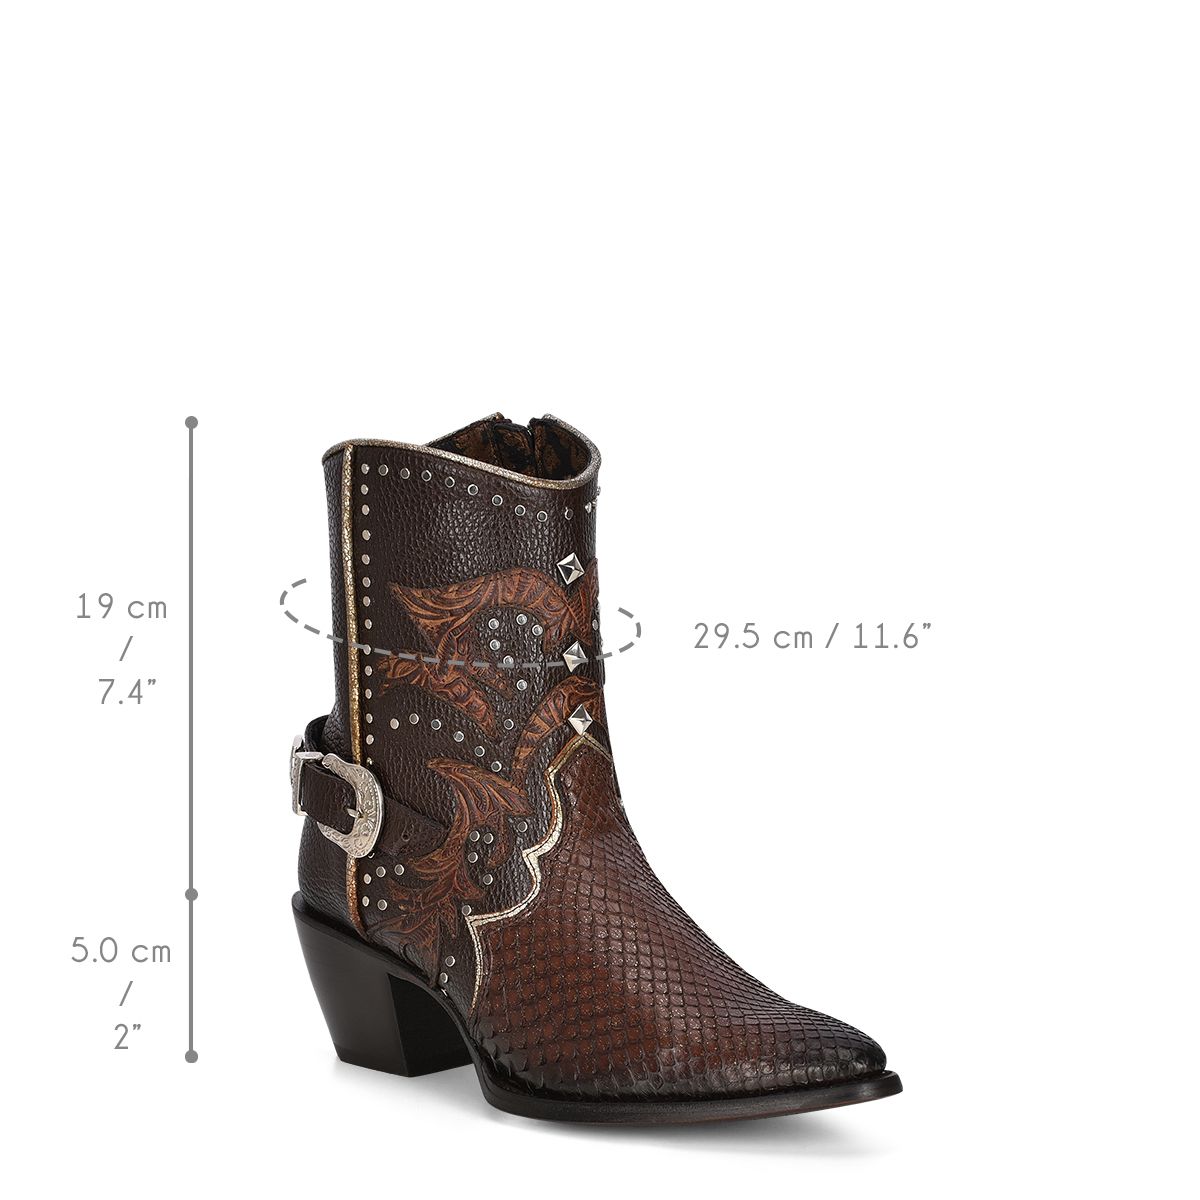 4A22PM - Cuadra brown western cowgirl python ankle boots for women-Kuet.us